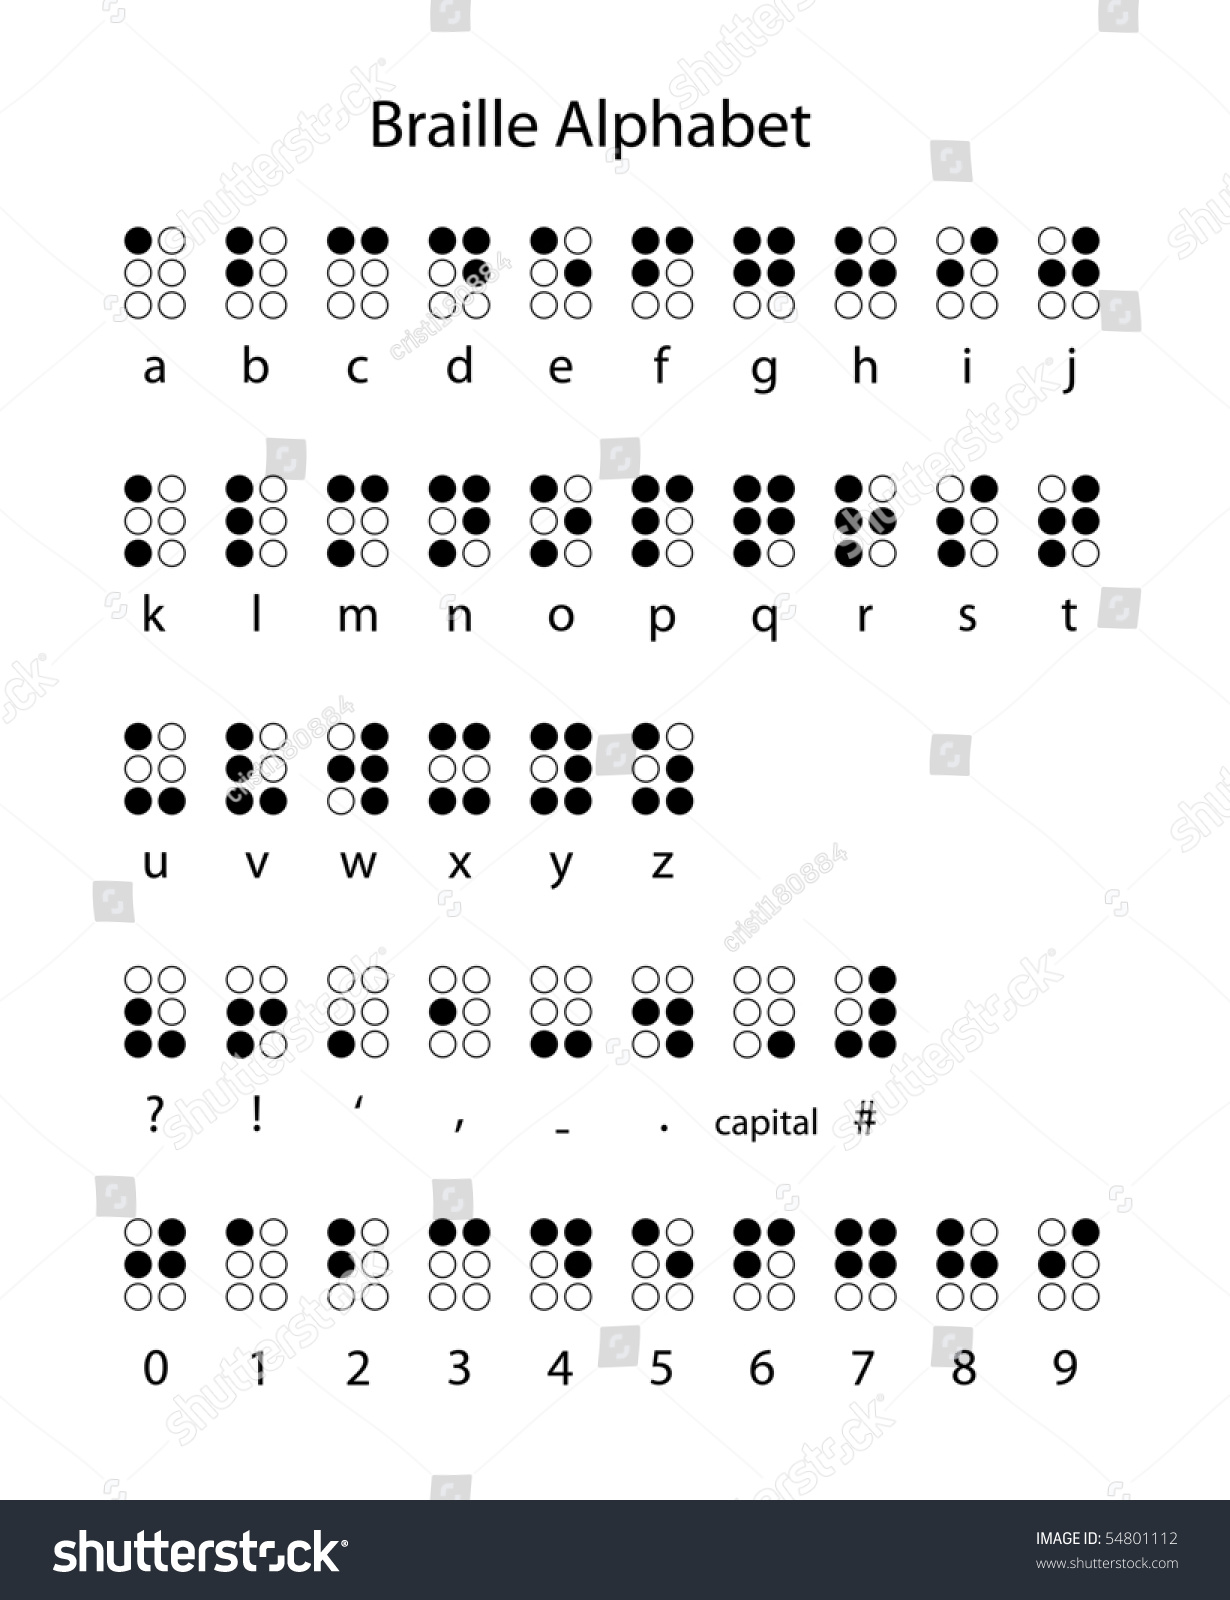 braille-alphabet-punctuation-and-numbers-stock-vector-illustration